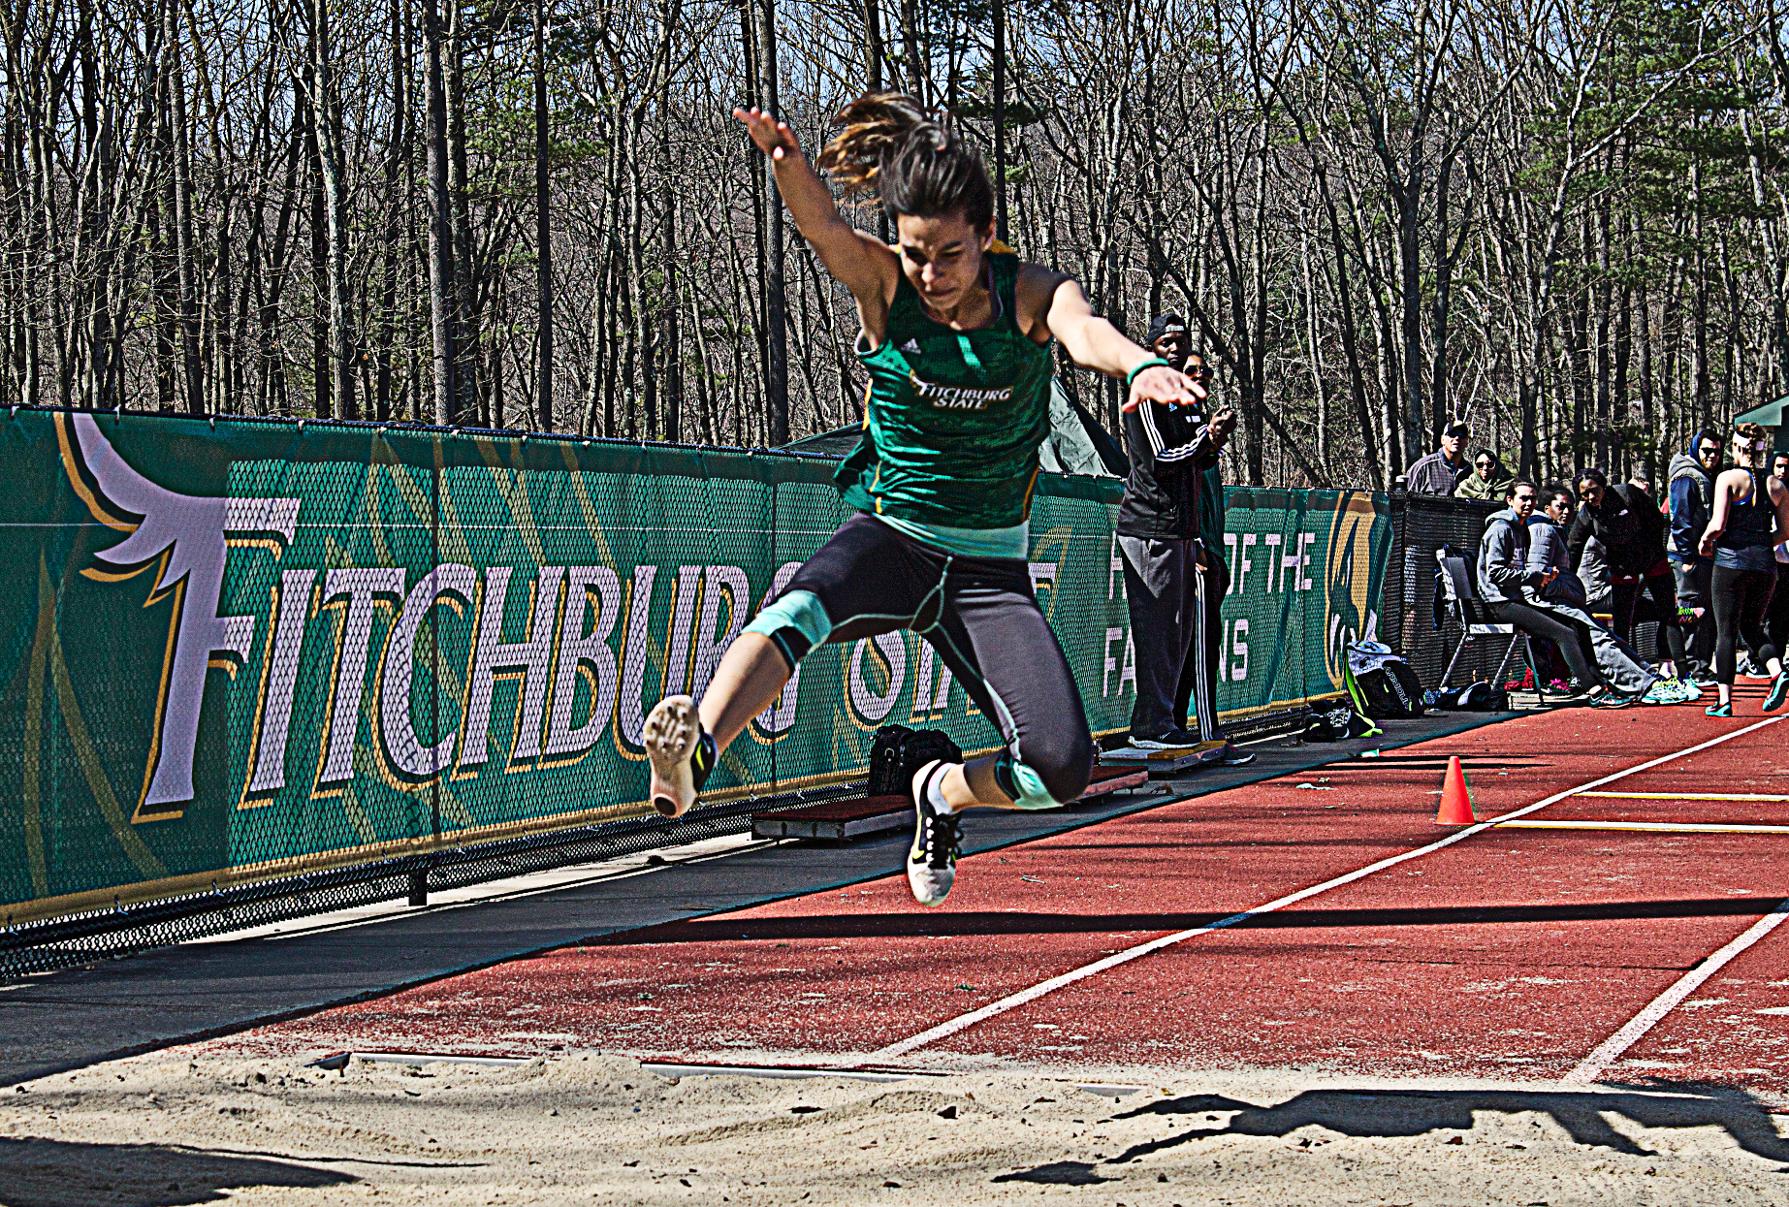 Fitchburg State Hosts Eric Loeschner Invite